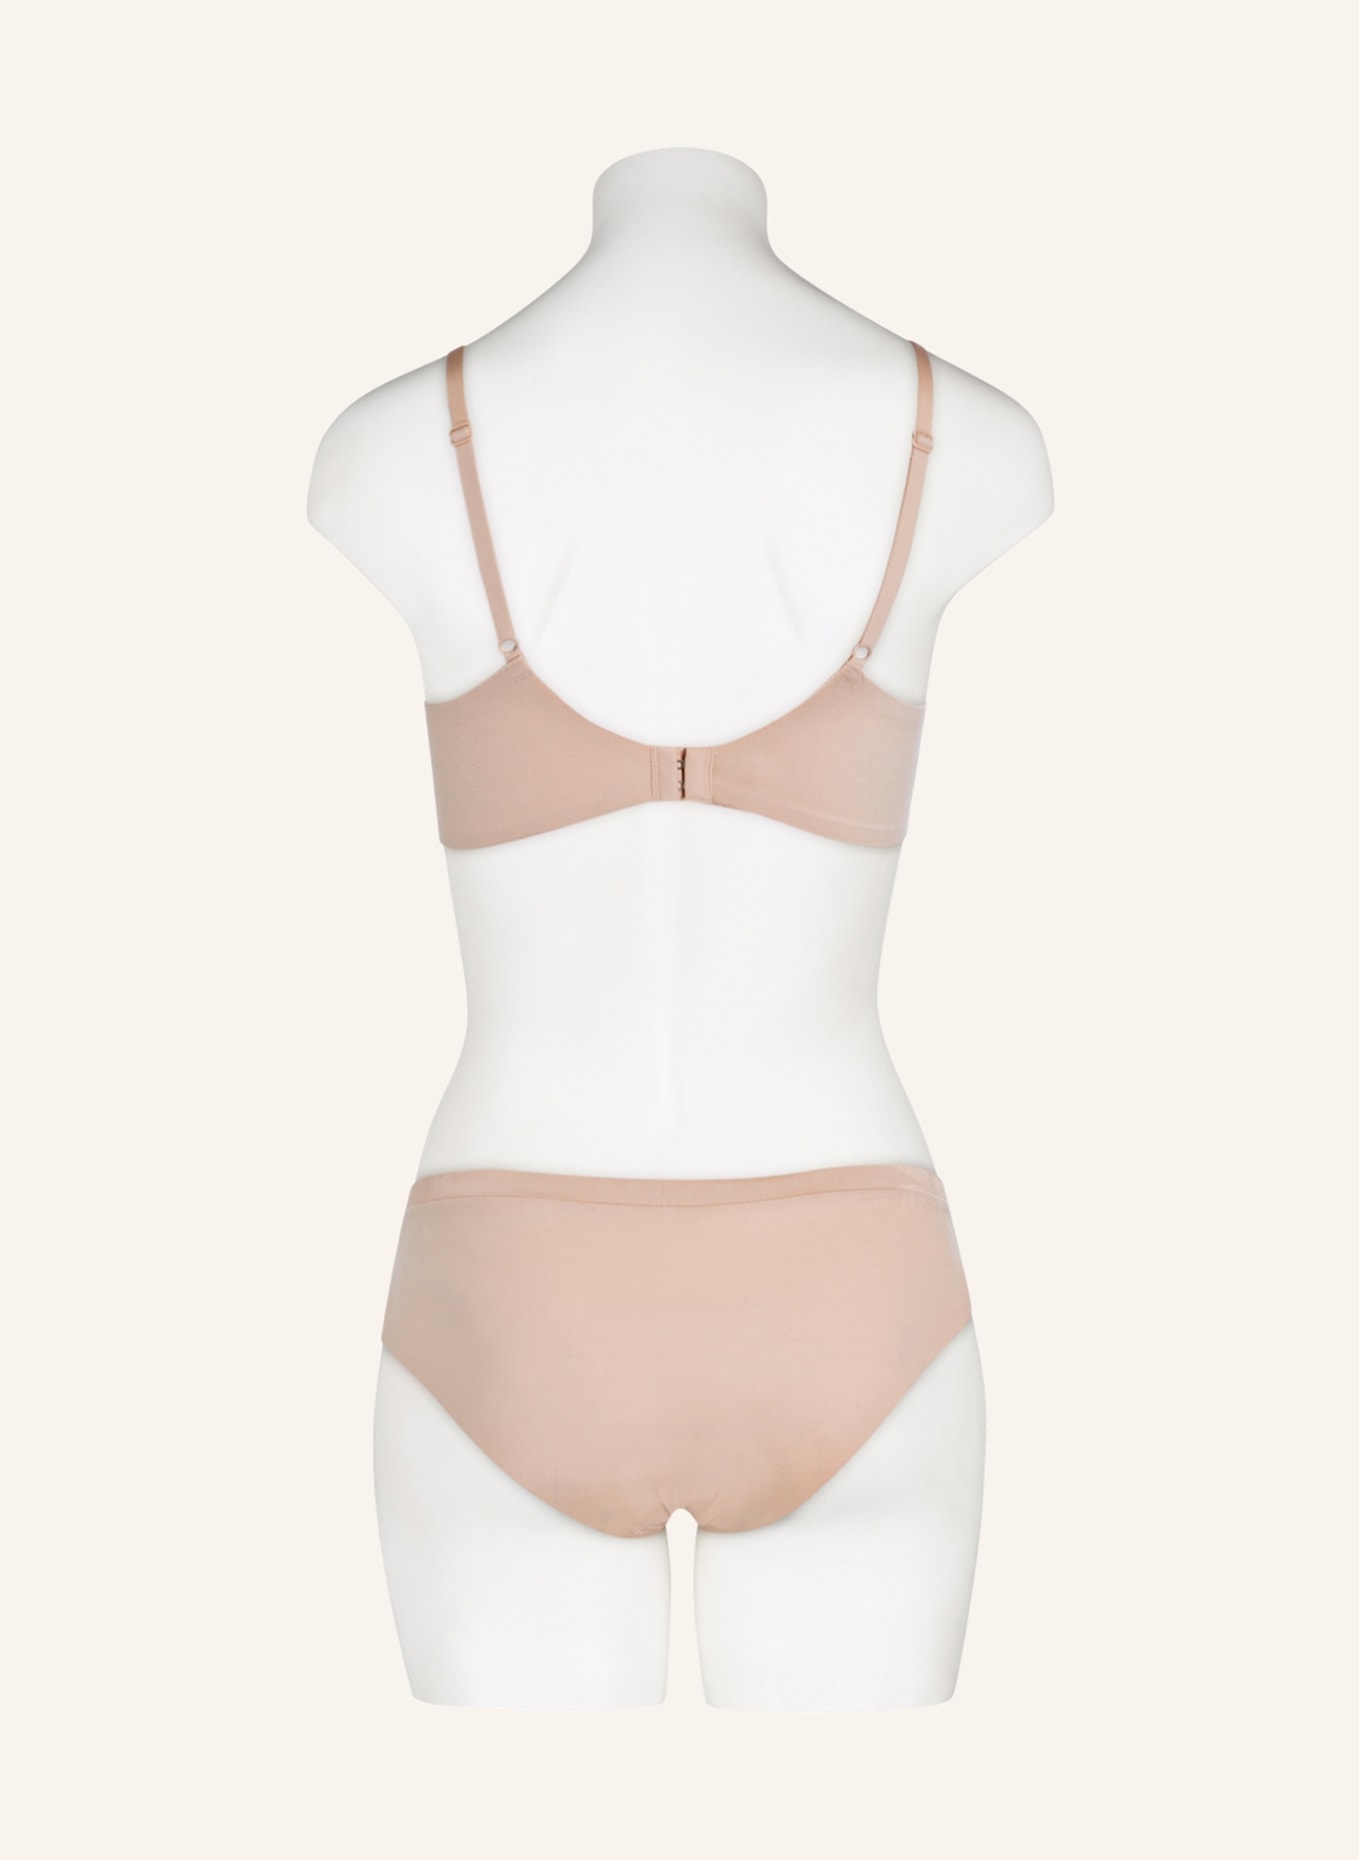 Triumph T-shirt bra BODY MAKE-UP SOFT TOUCH , Color: NUDE (Image 3)